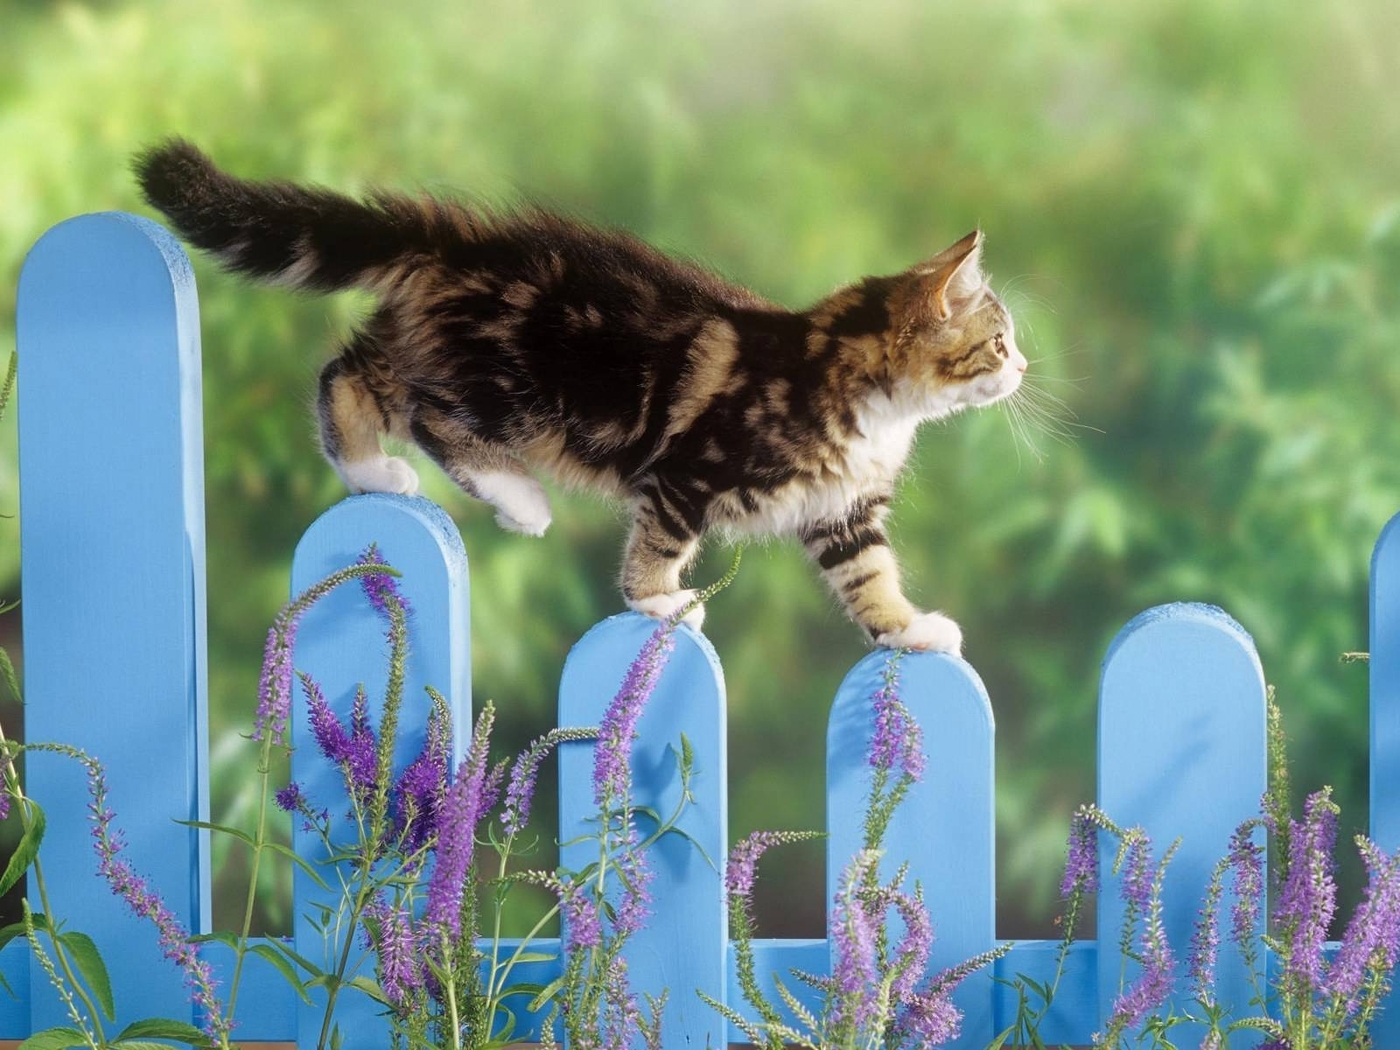 Image: Kitten, paws, wool, fence, plants, grass, goes